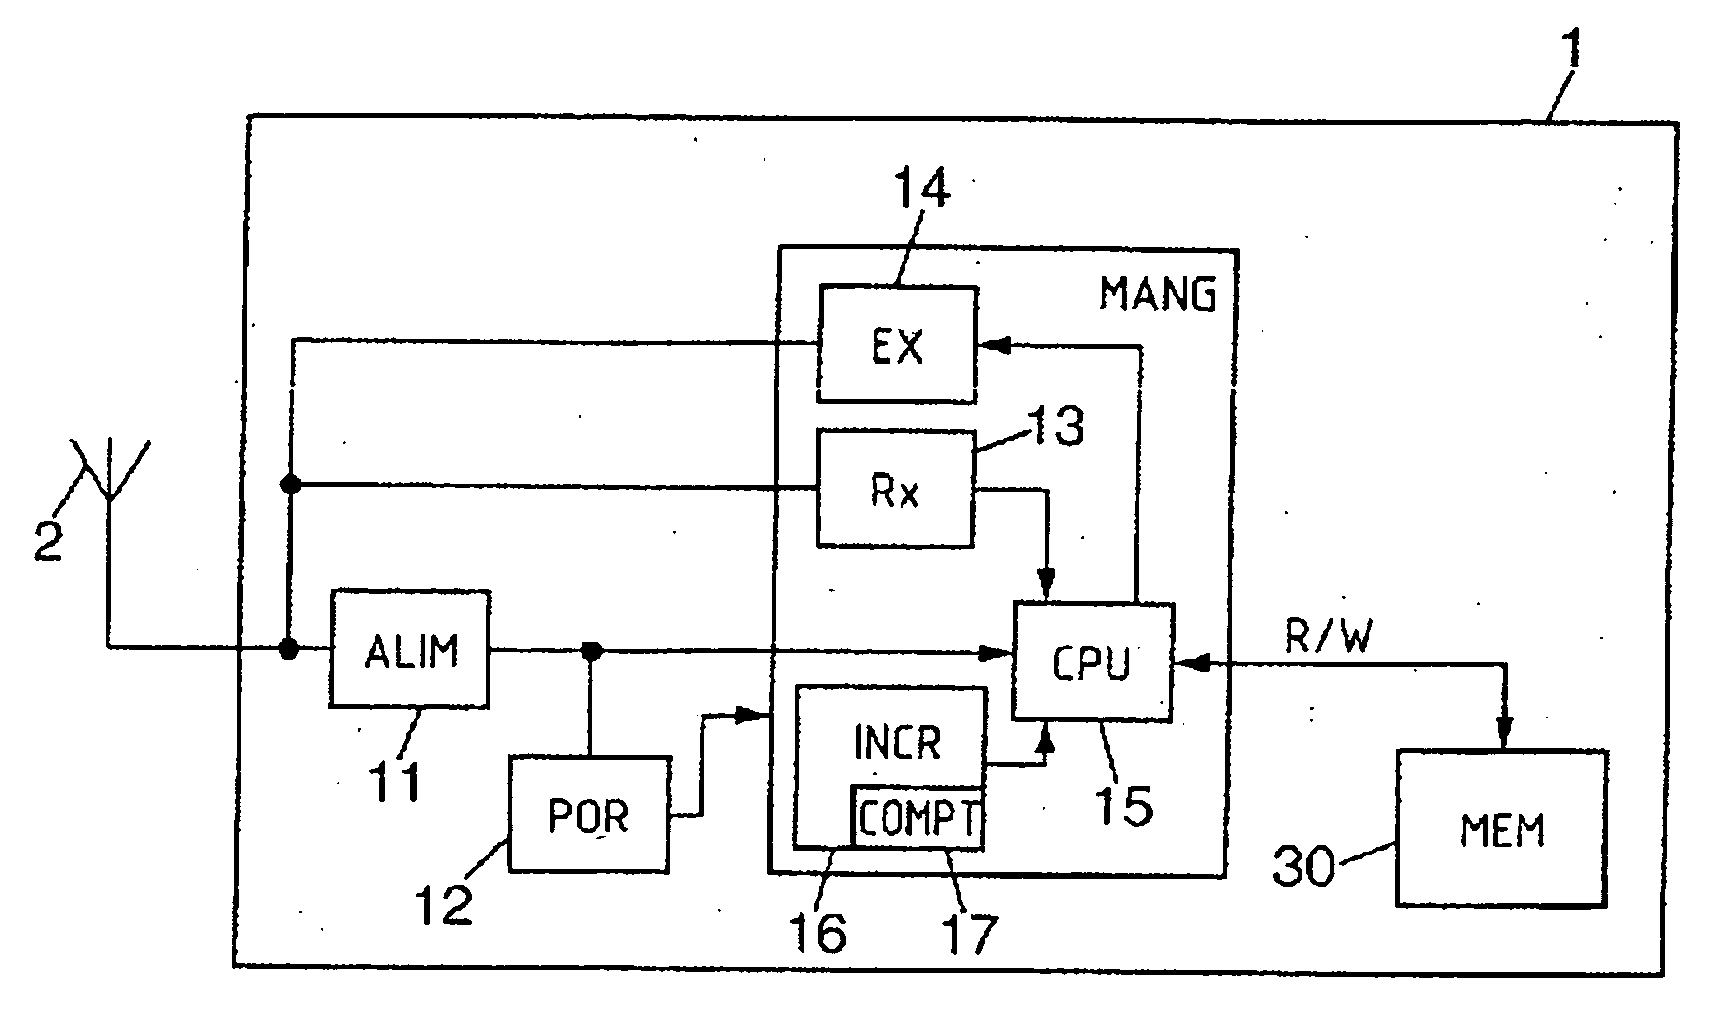 Method of reading the memory plane of a contactless tag